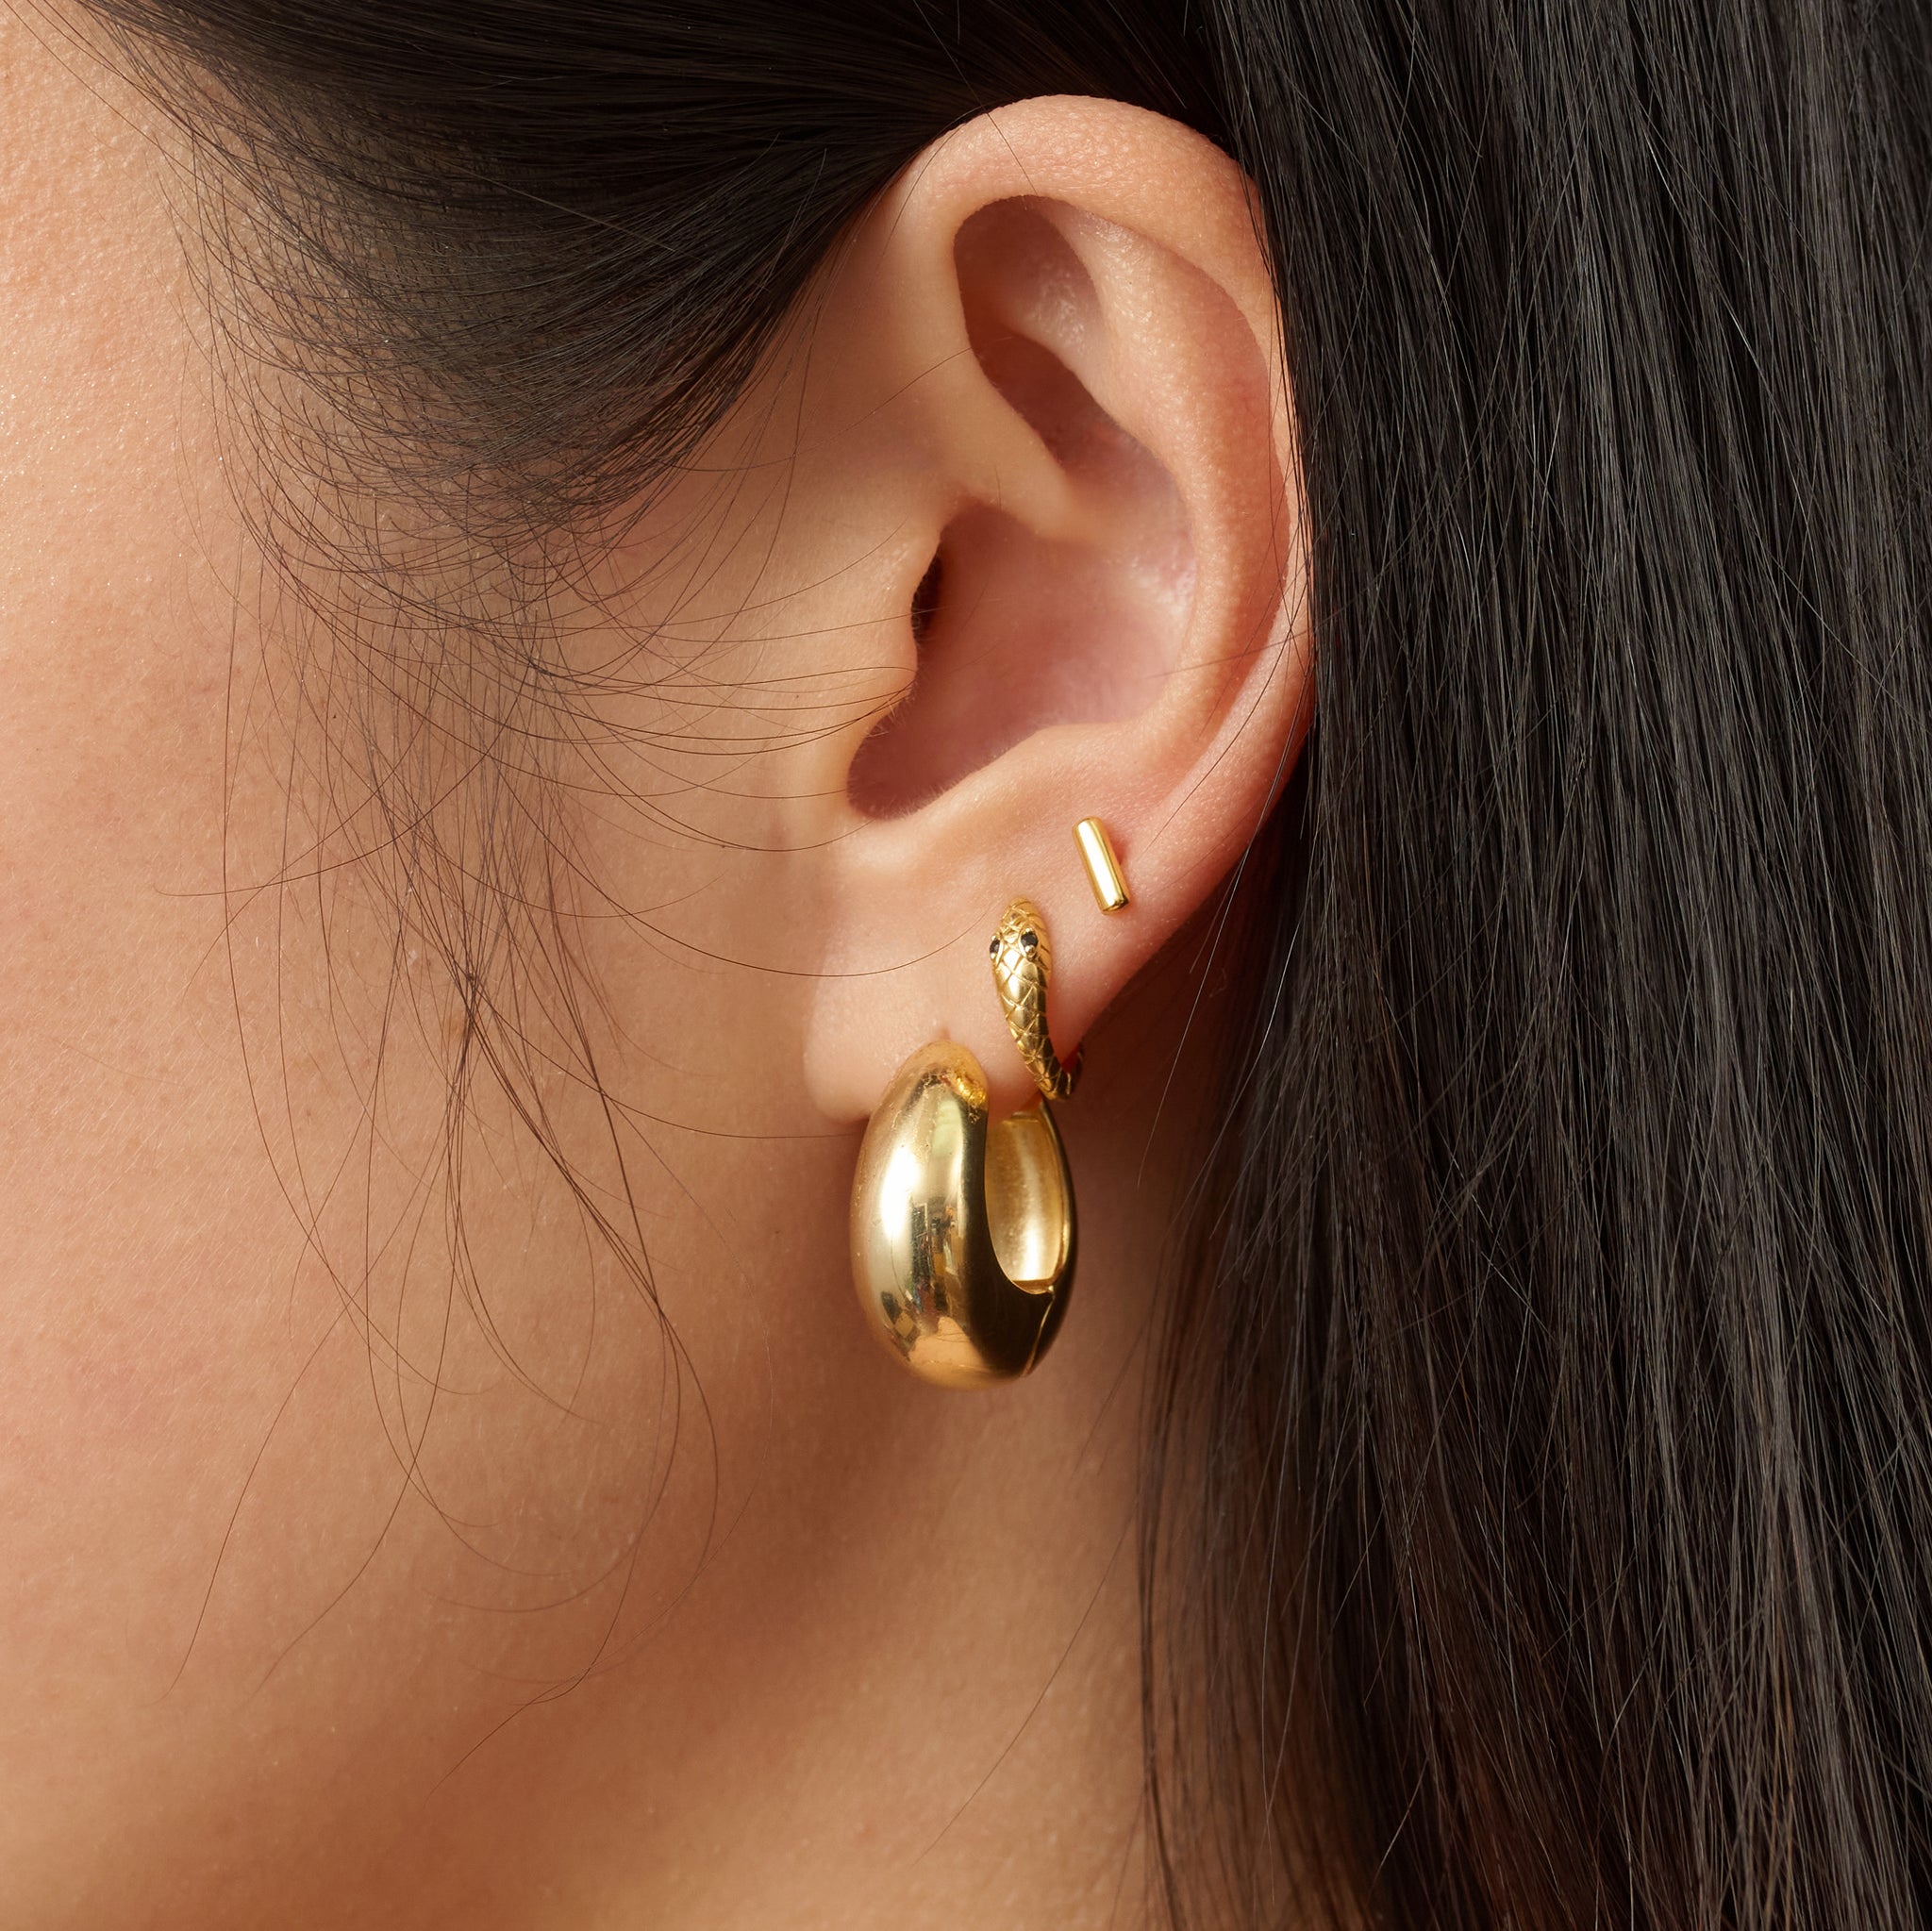 Everyday fine/semi-fine earrings in NYC that not irritate your ears –  Doviana